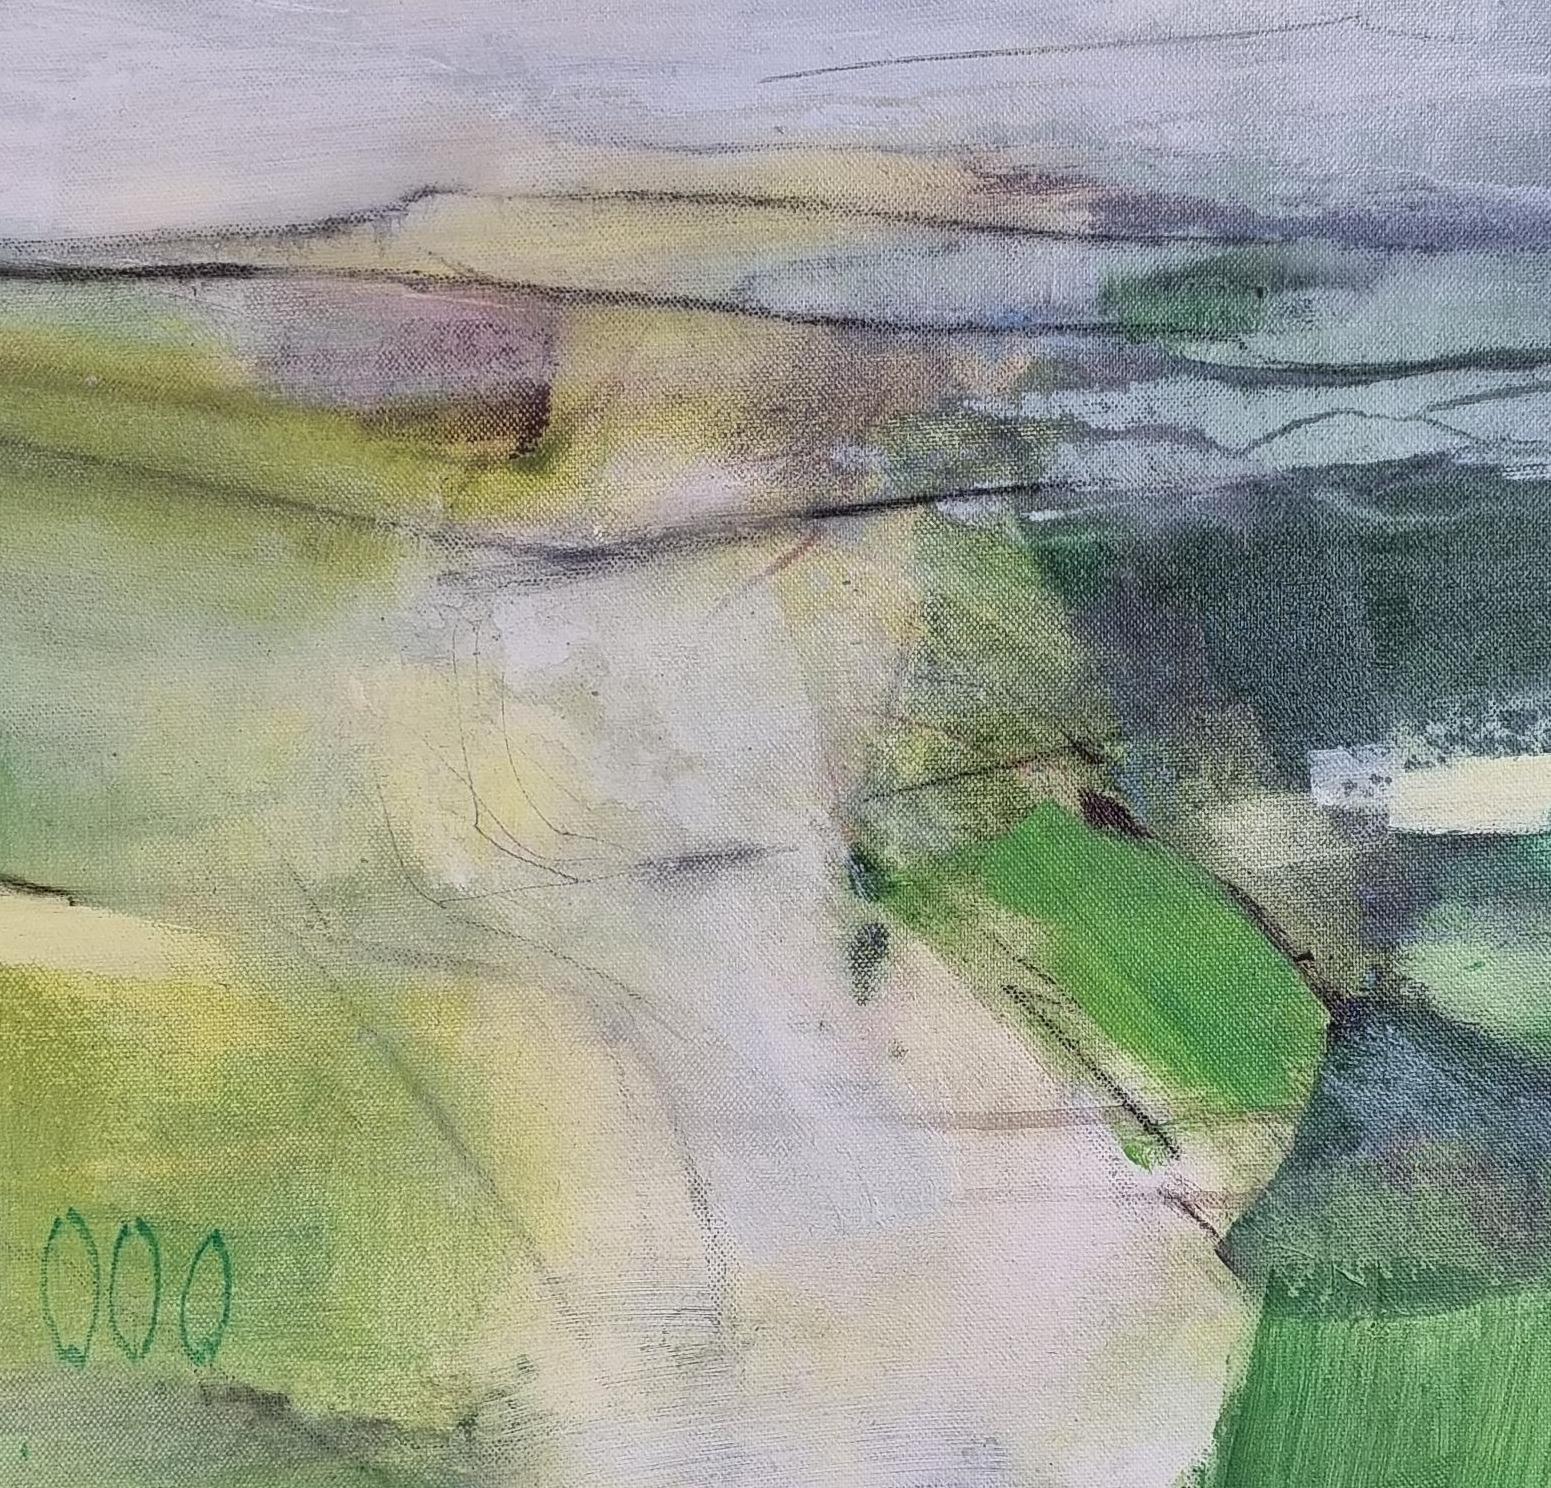 What Lies Ahead - Contemporary British Landscape: Mixed Media on Canvas - Painting by Andrew Kinmont